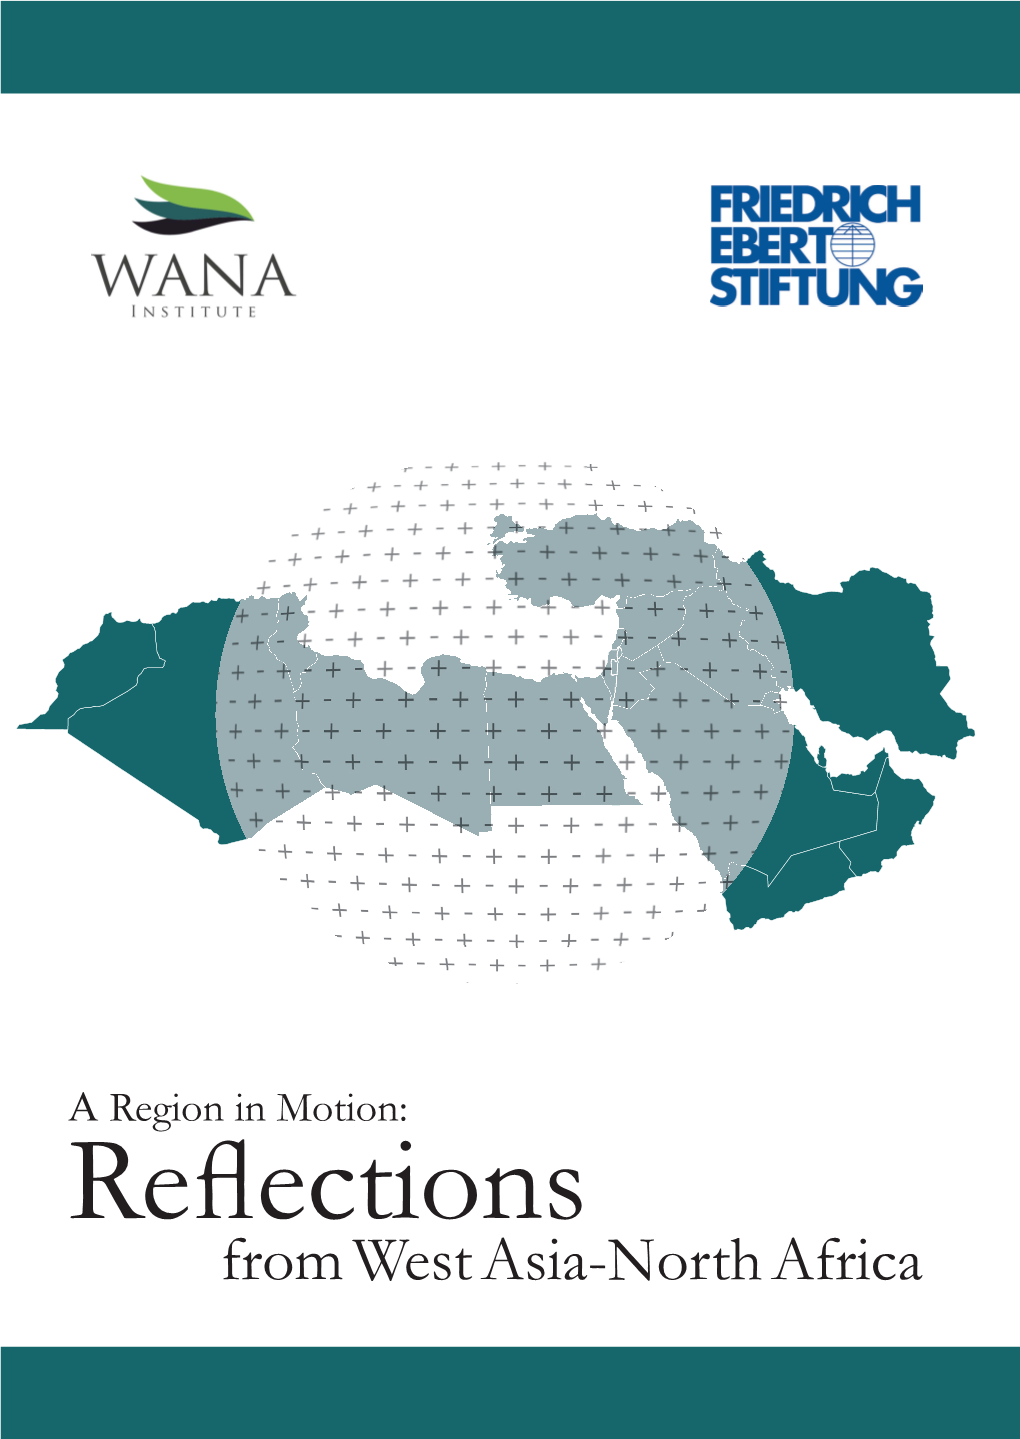 A Region in Motion: Reflections from West Asia-North Africa